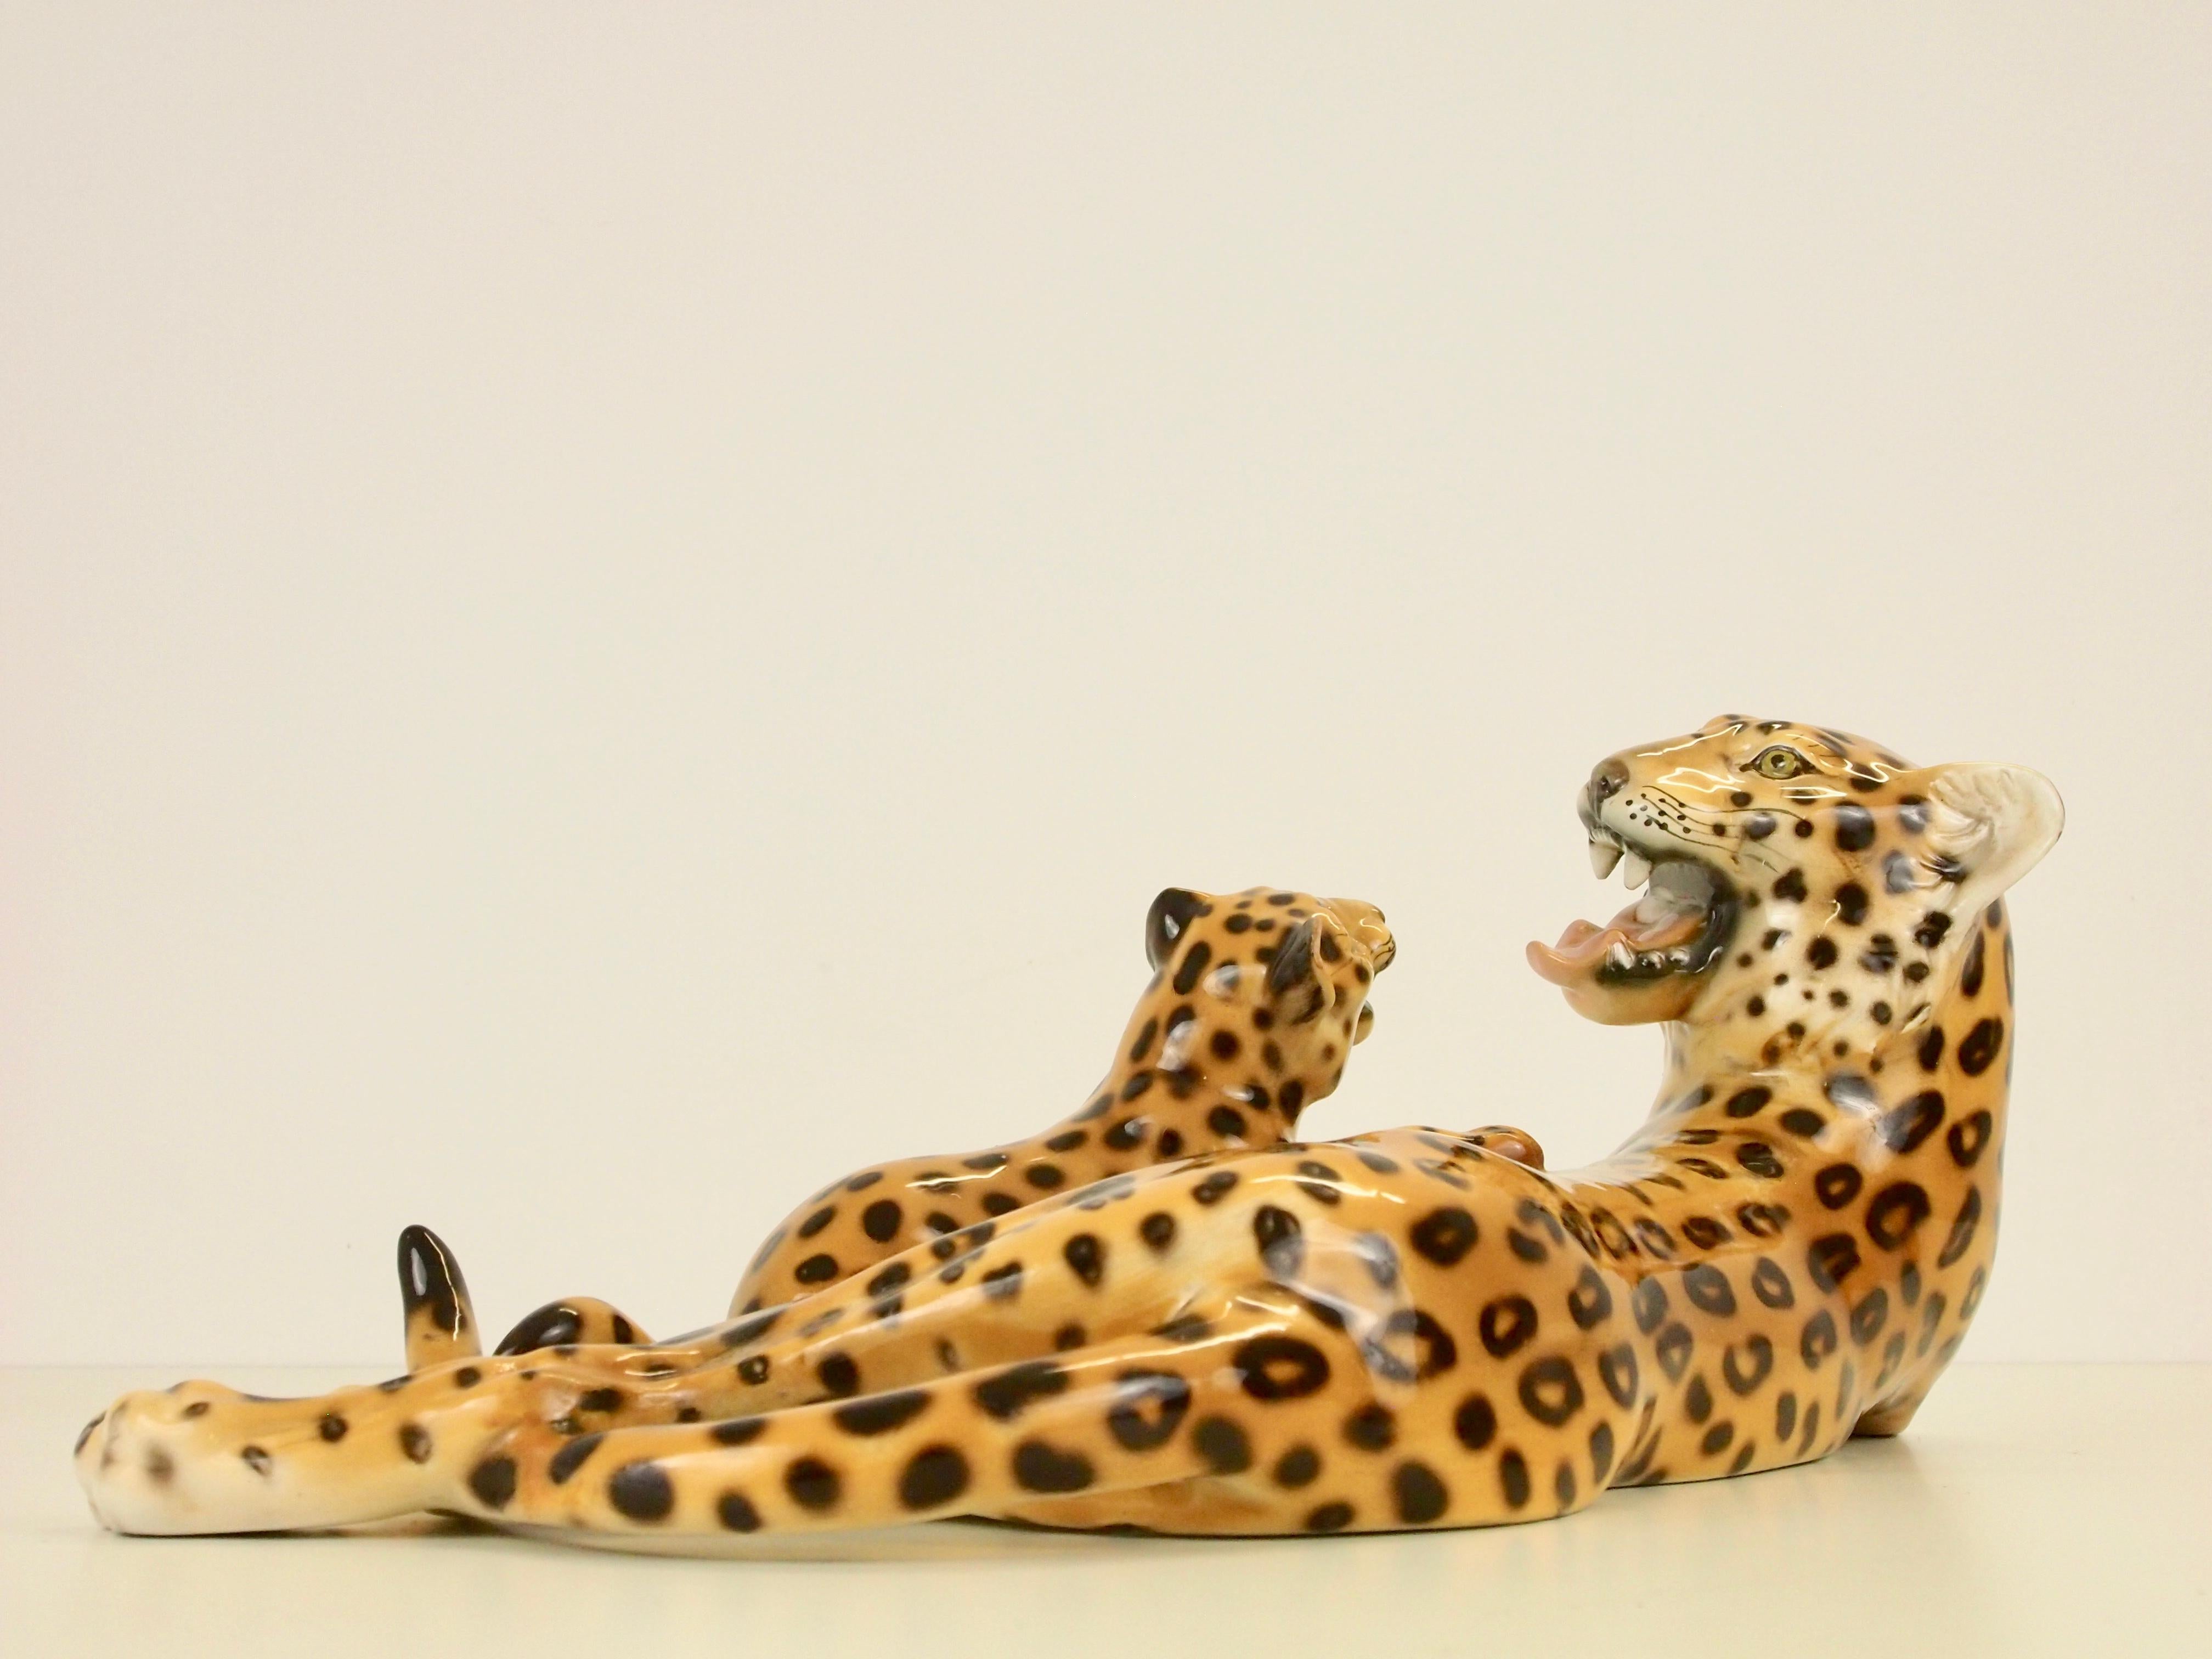 Vintage sublime fine hand painted porcelain statuette from Italy depicting a leopard mother playing with her cube.

This lovely statuette is not signed underneath with the manufactory stamp but just with a handwritten 